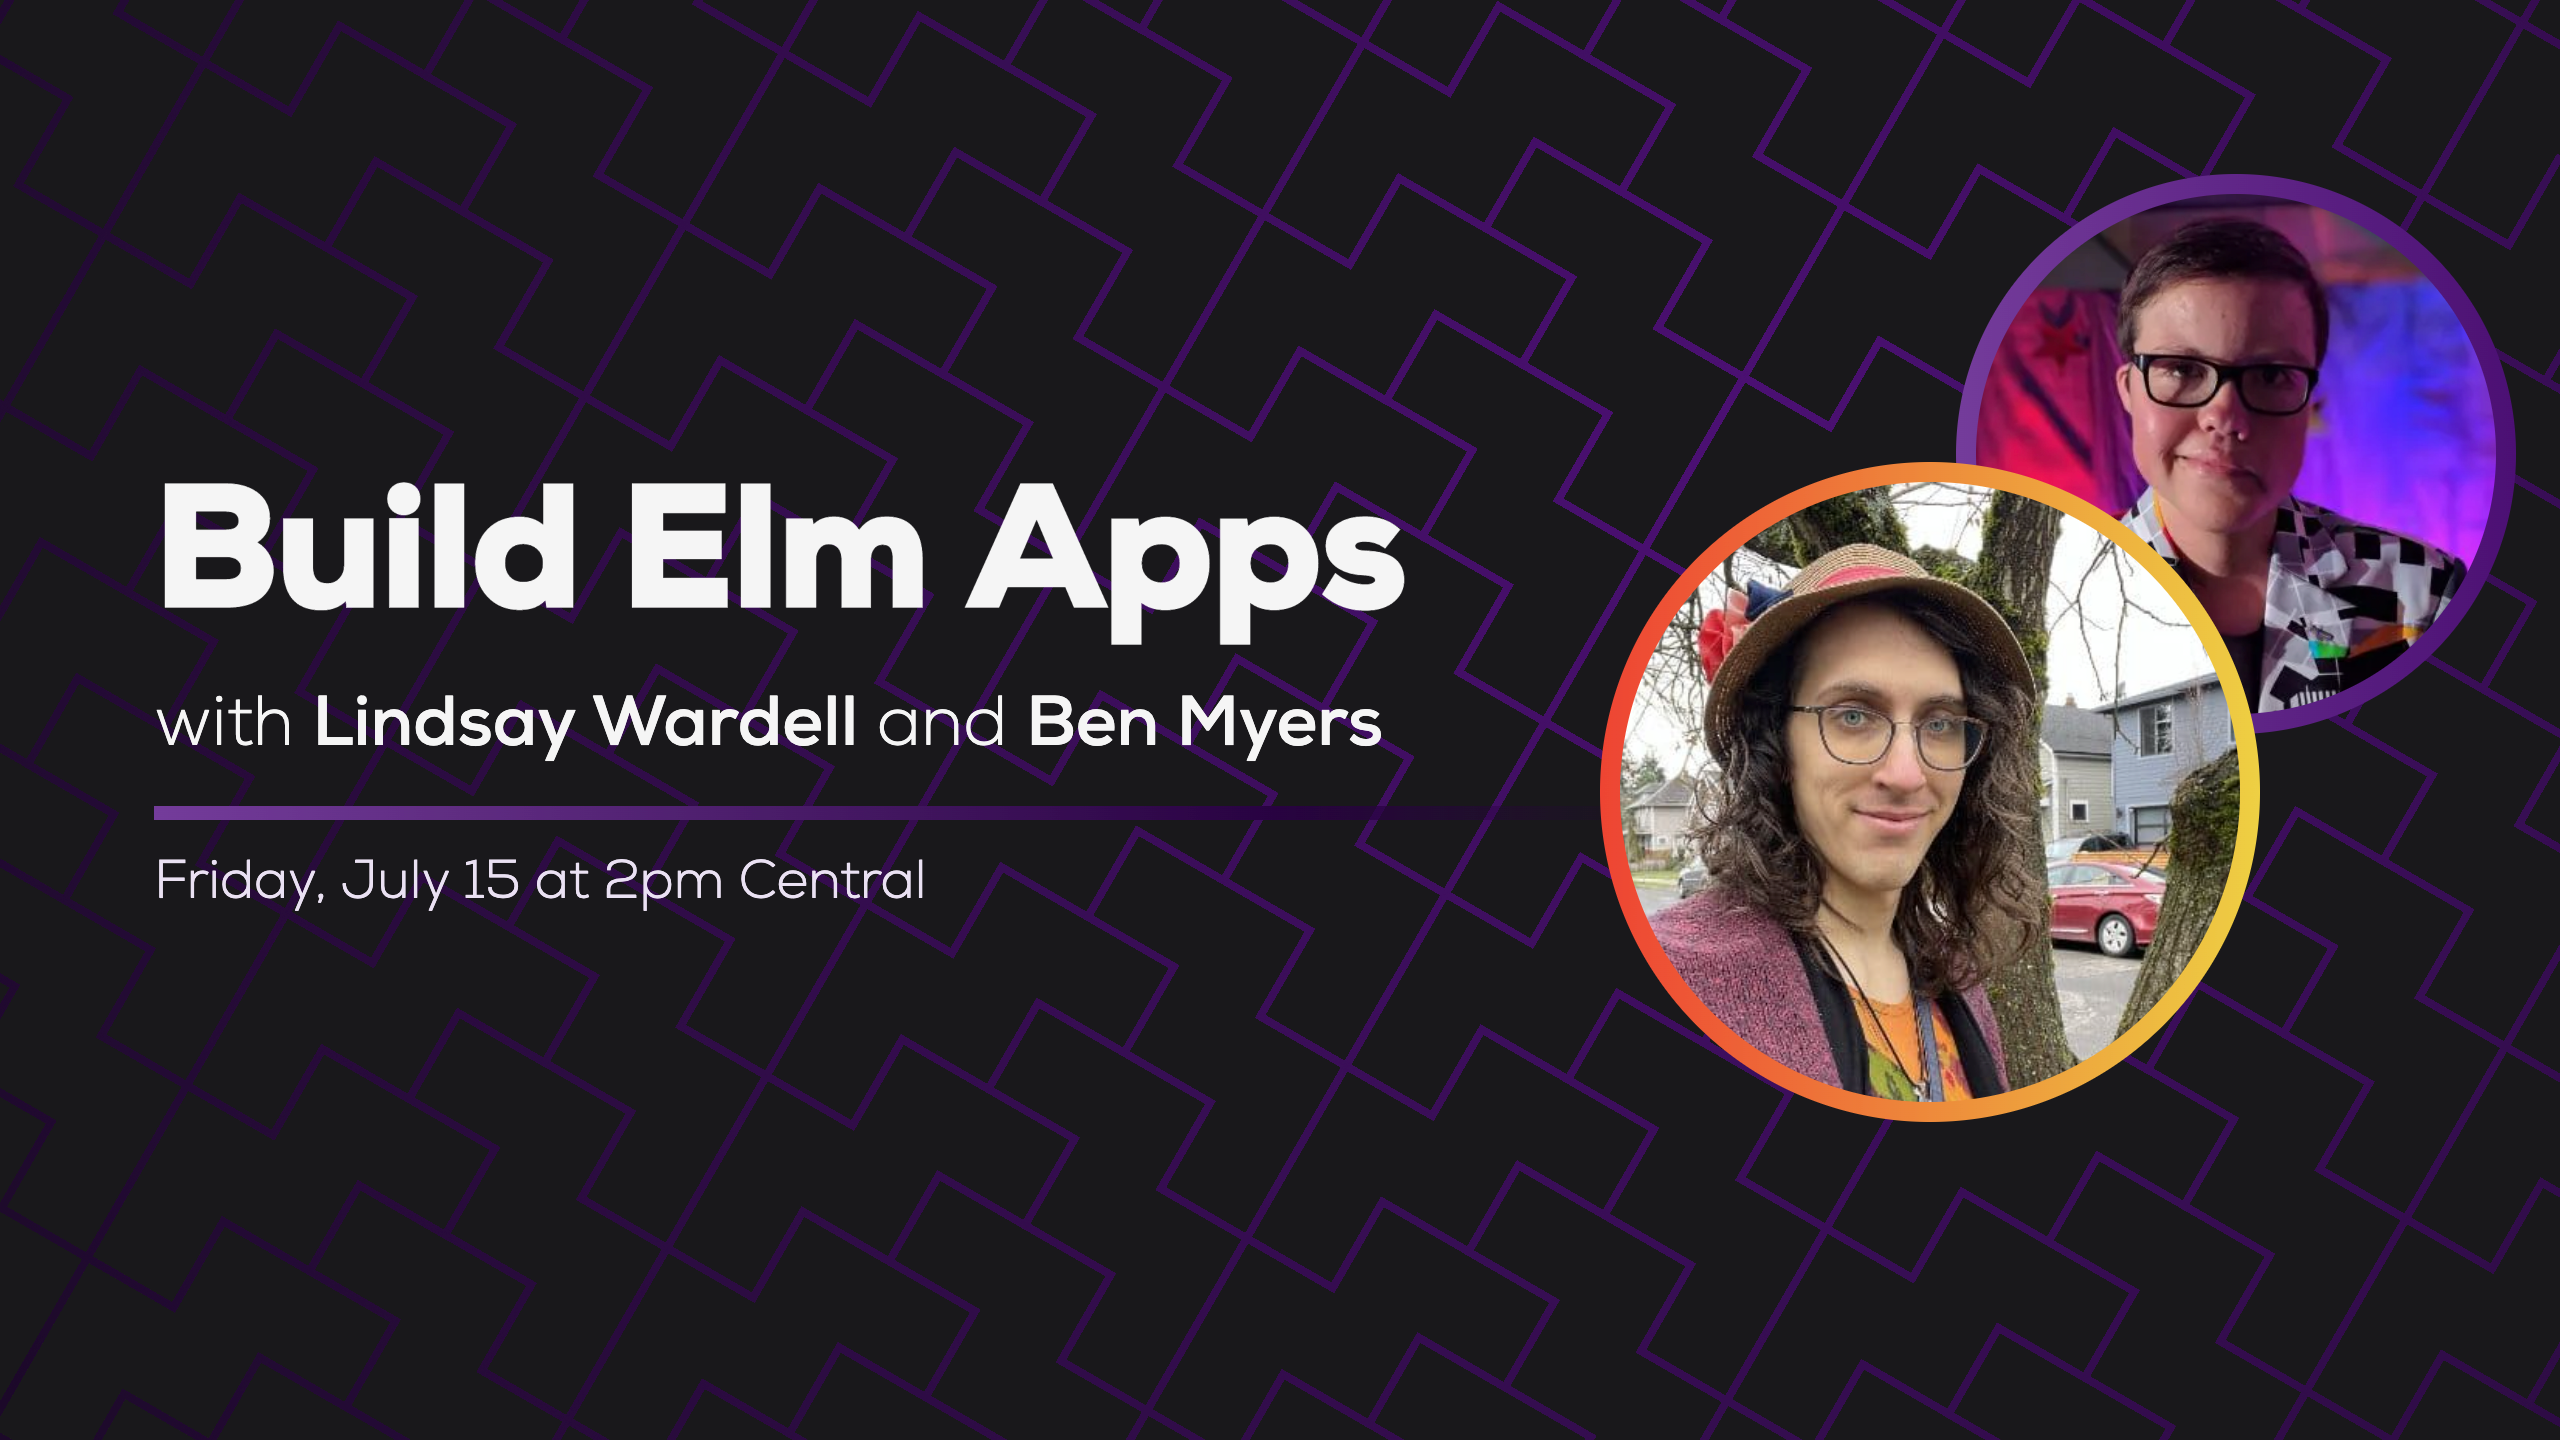 Build Elm Apps with Lindsay Wardell